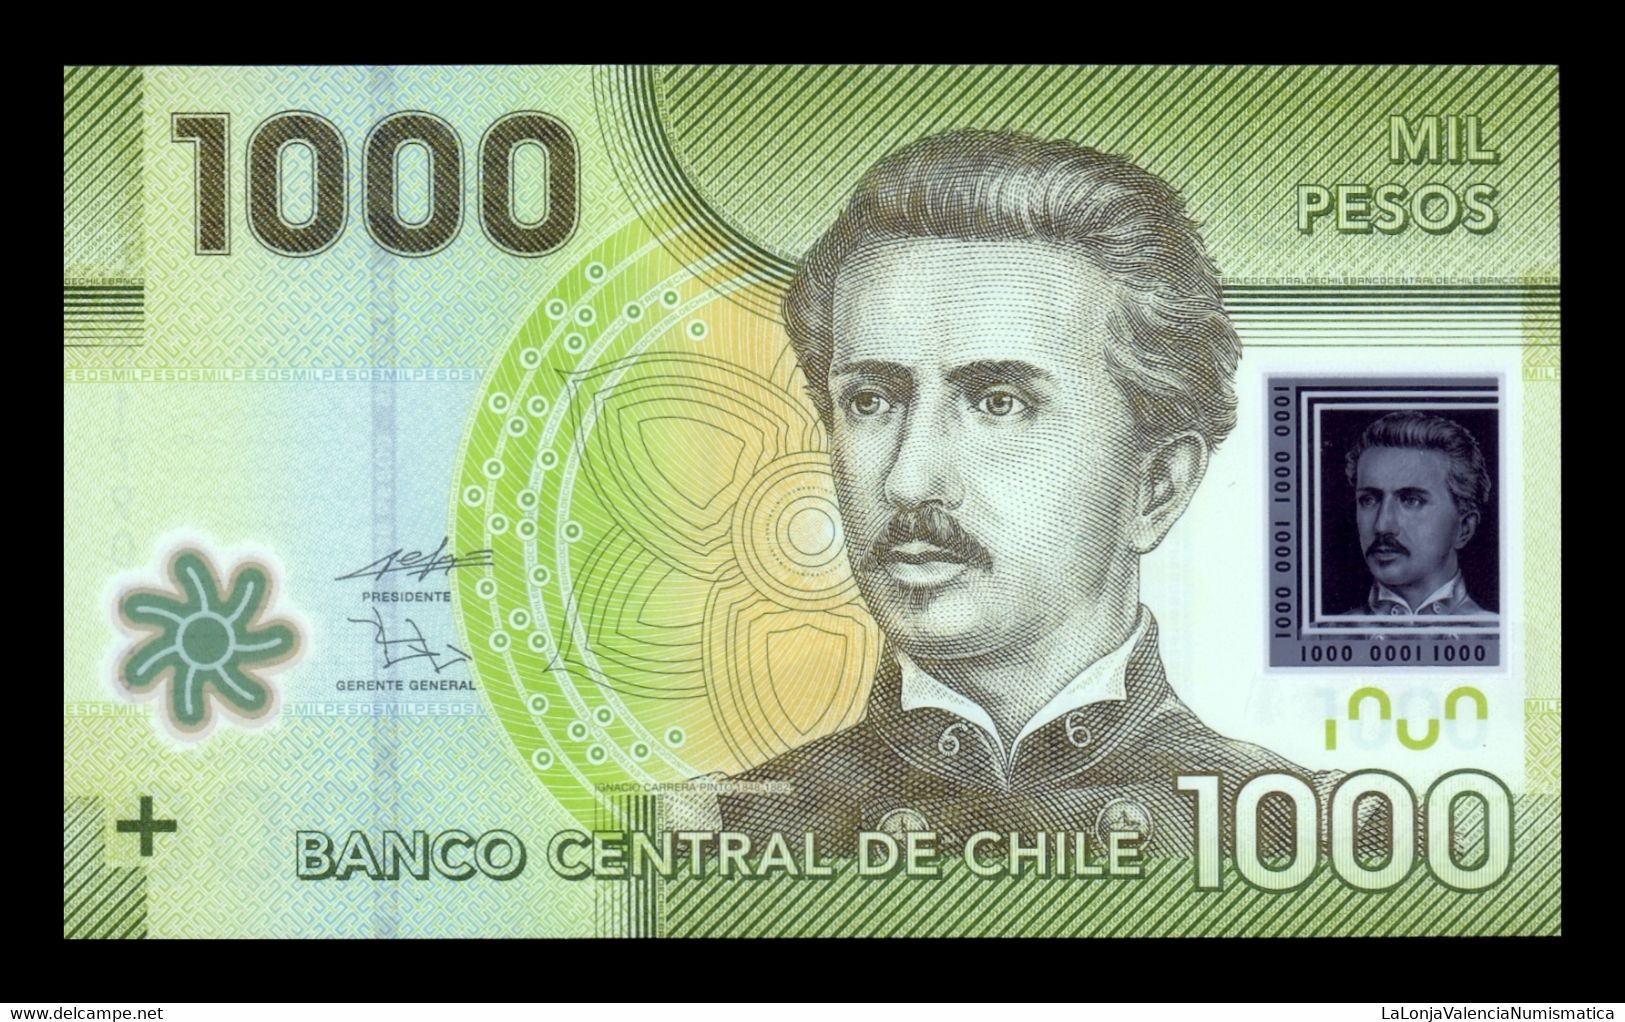 Chile 1000 Pesos 2010 Pick 161a First Date Polymer SC UNC - Cile